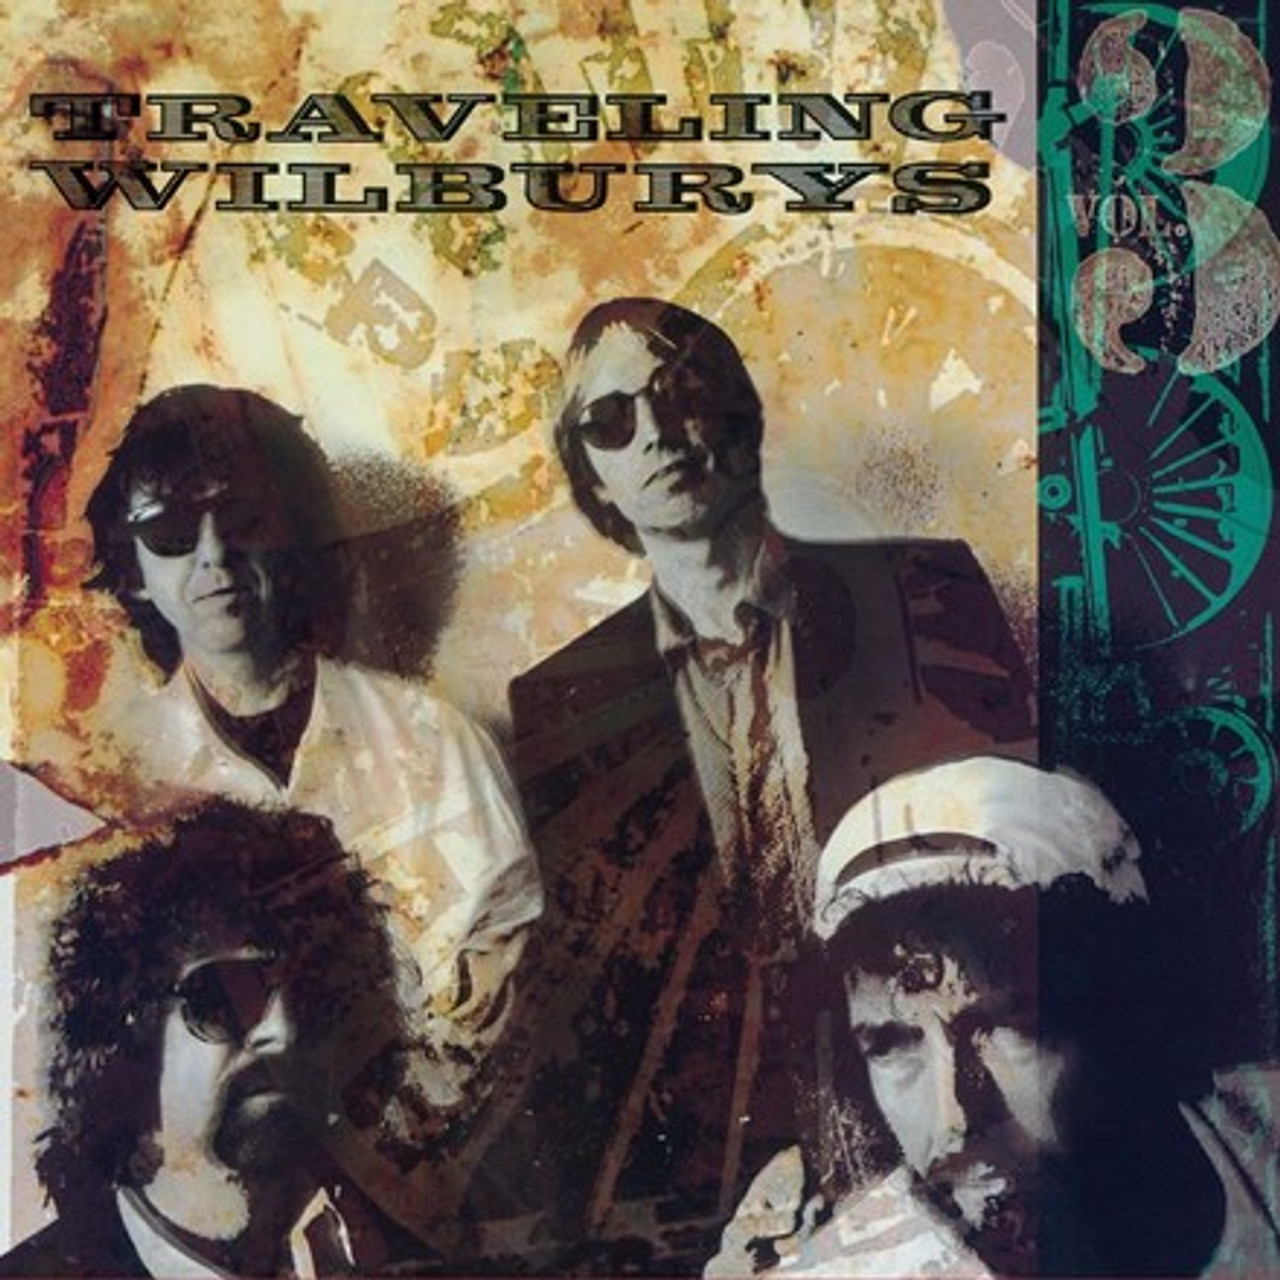 The Wilburys - The Traveling Vol. 3 LP) - Music Direct